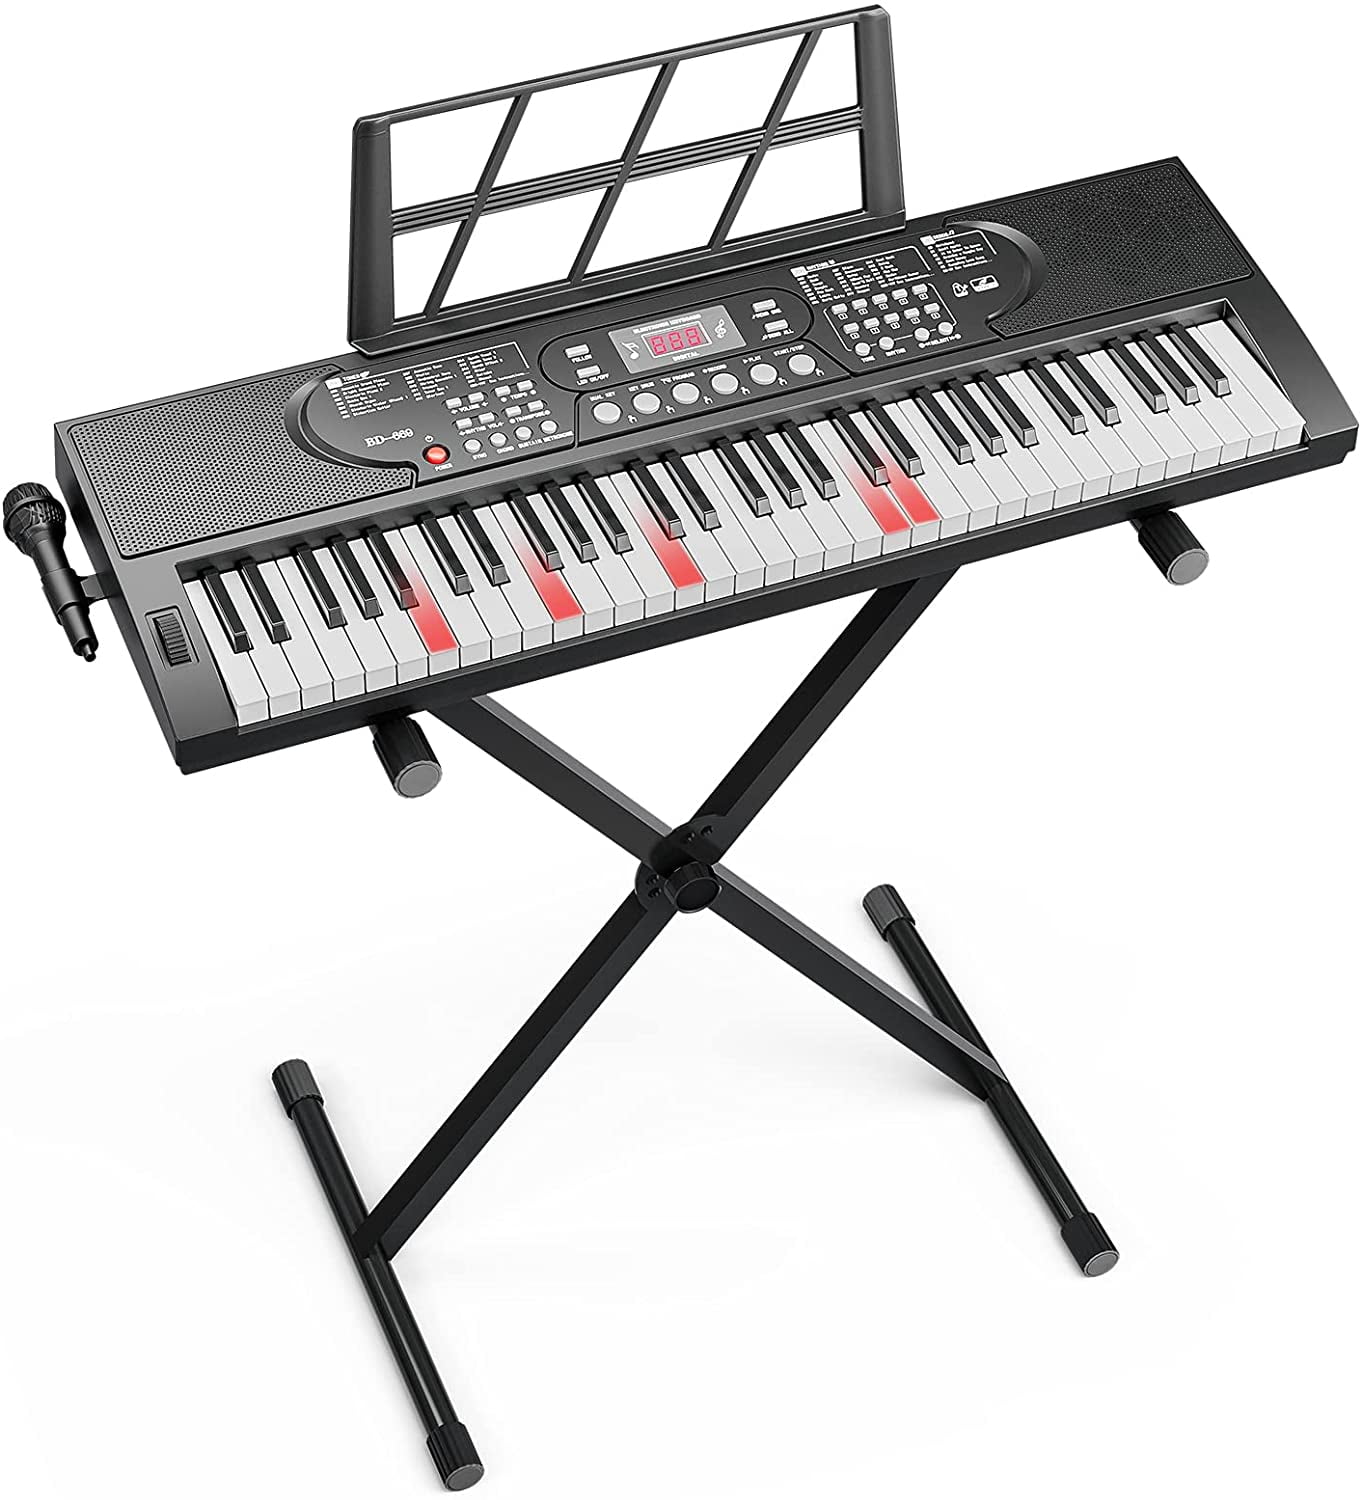 Music Stand for Beginner Kid and Adult Power Supply UMOMO UMK-811 Electric Piano Keyboard with Stand Portable Electronic Musical Piano with Microphone Black 61 key Music Keyboard Piano 